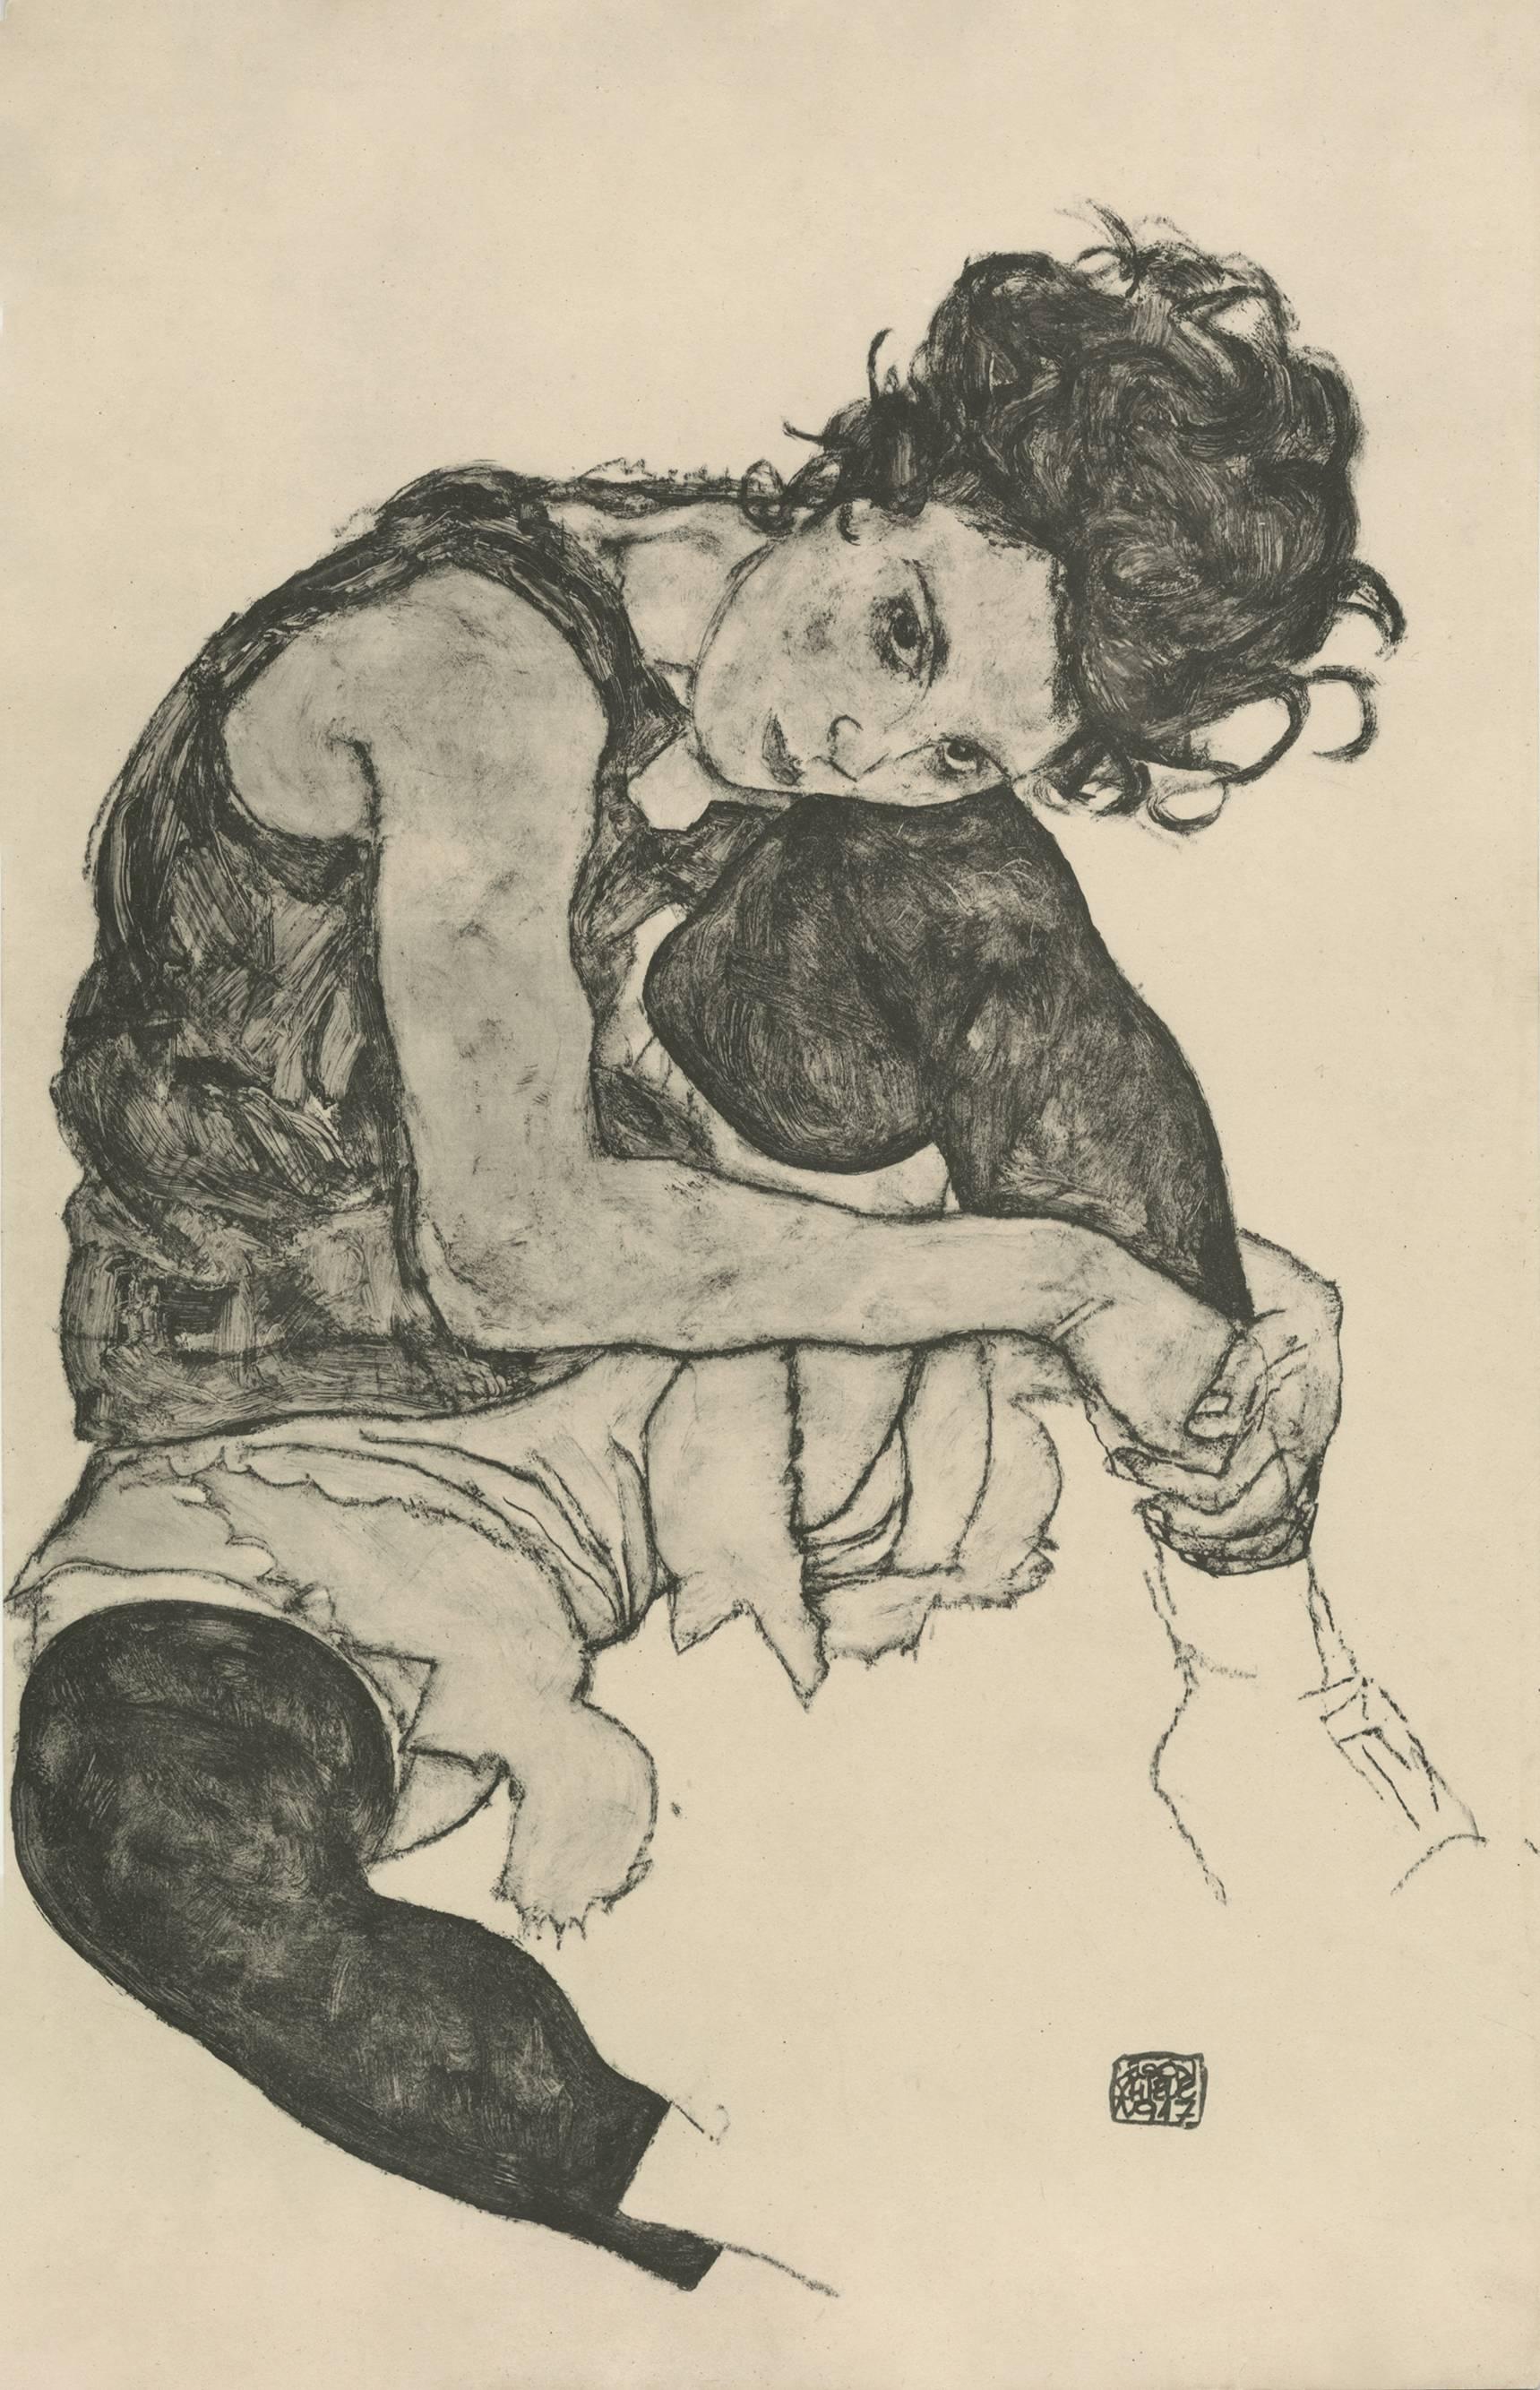 (after) Egon Schiele & Max Jaffe Figurative Print - R. Layni, Zeichnungen folio, "Seated Woman with Bent Knee" Collotype plate I